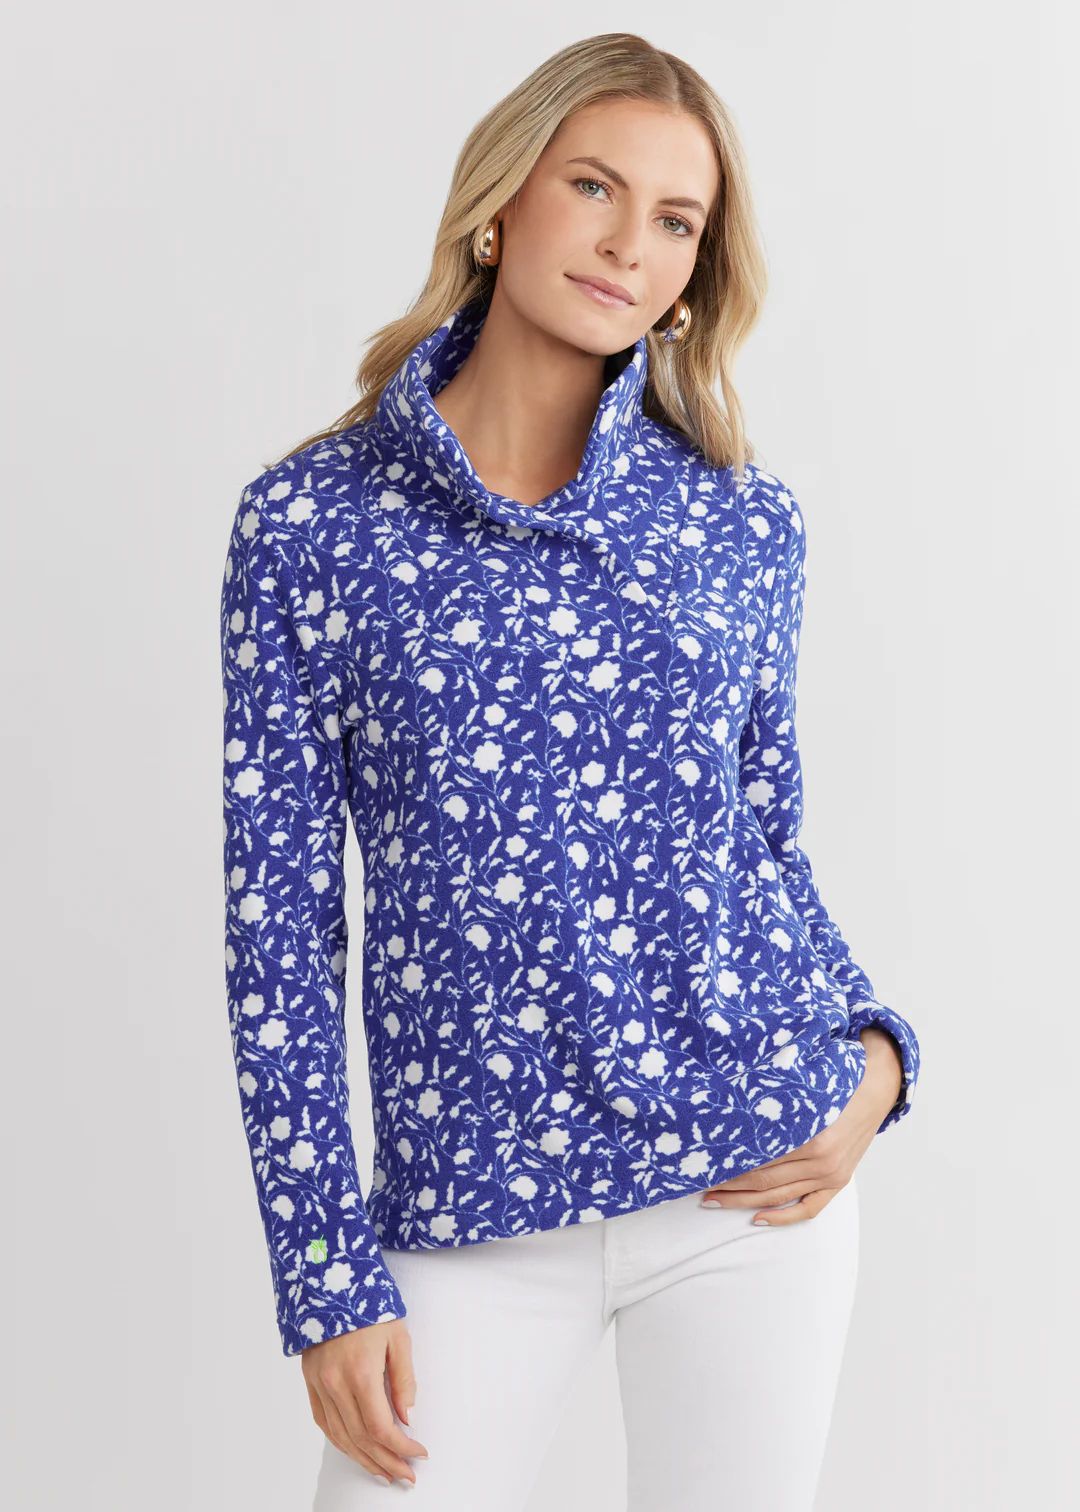 Sheffield Island Pullover in Terry Fleece (Blue Floral) | Dudley Stephens